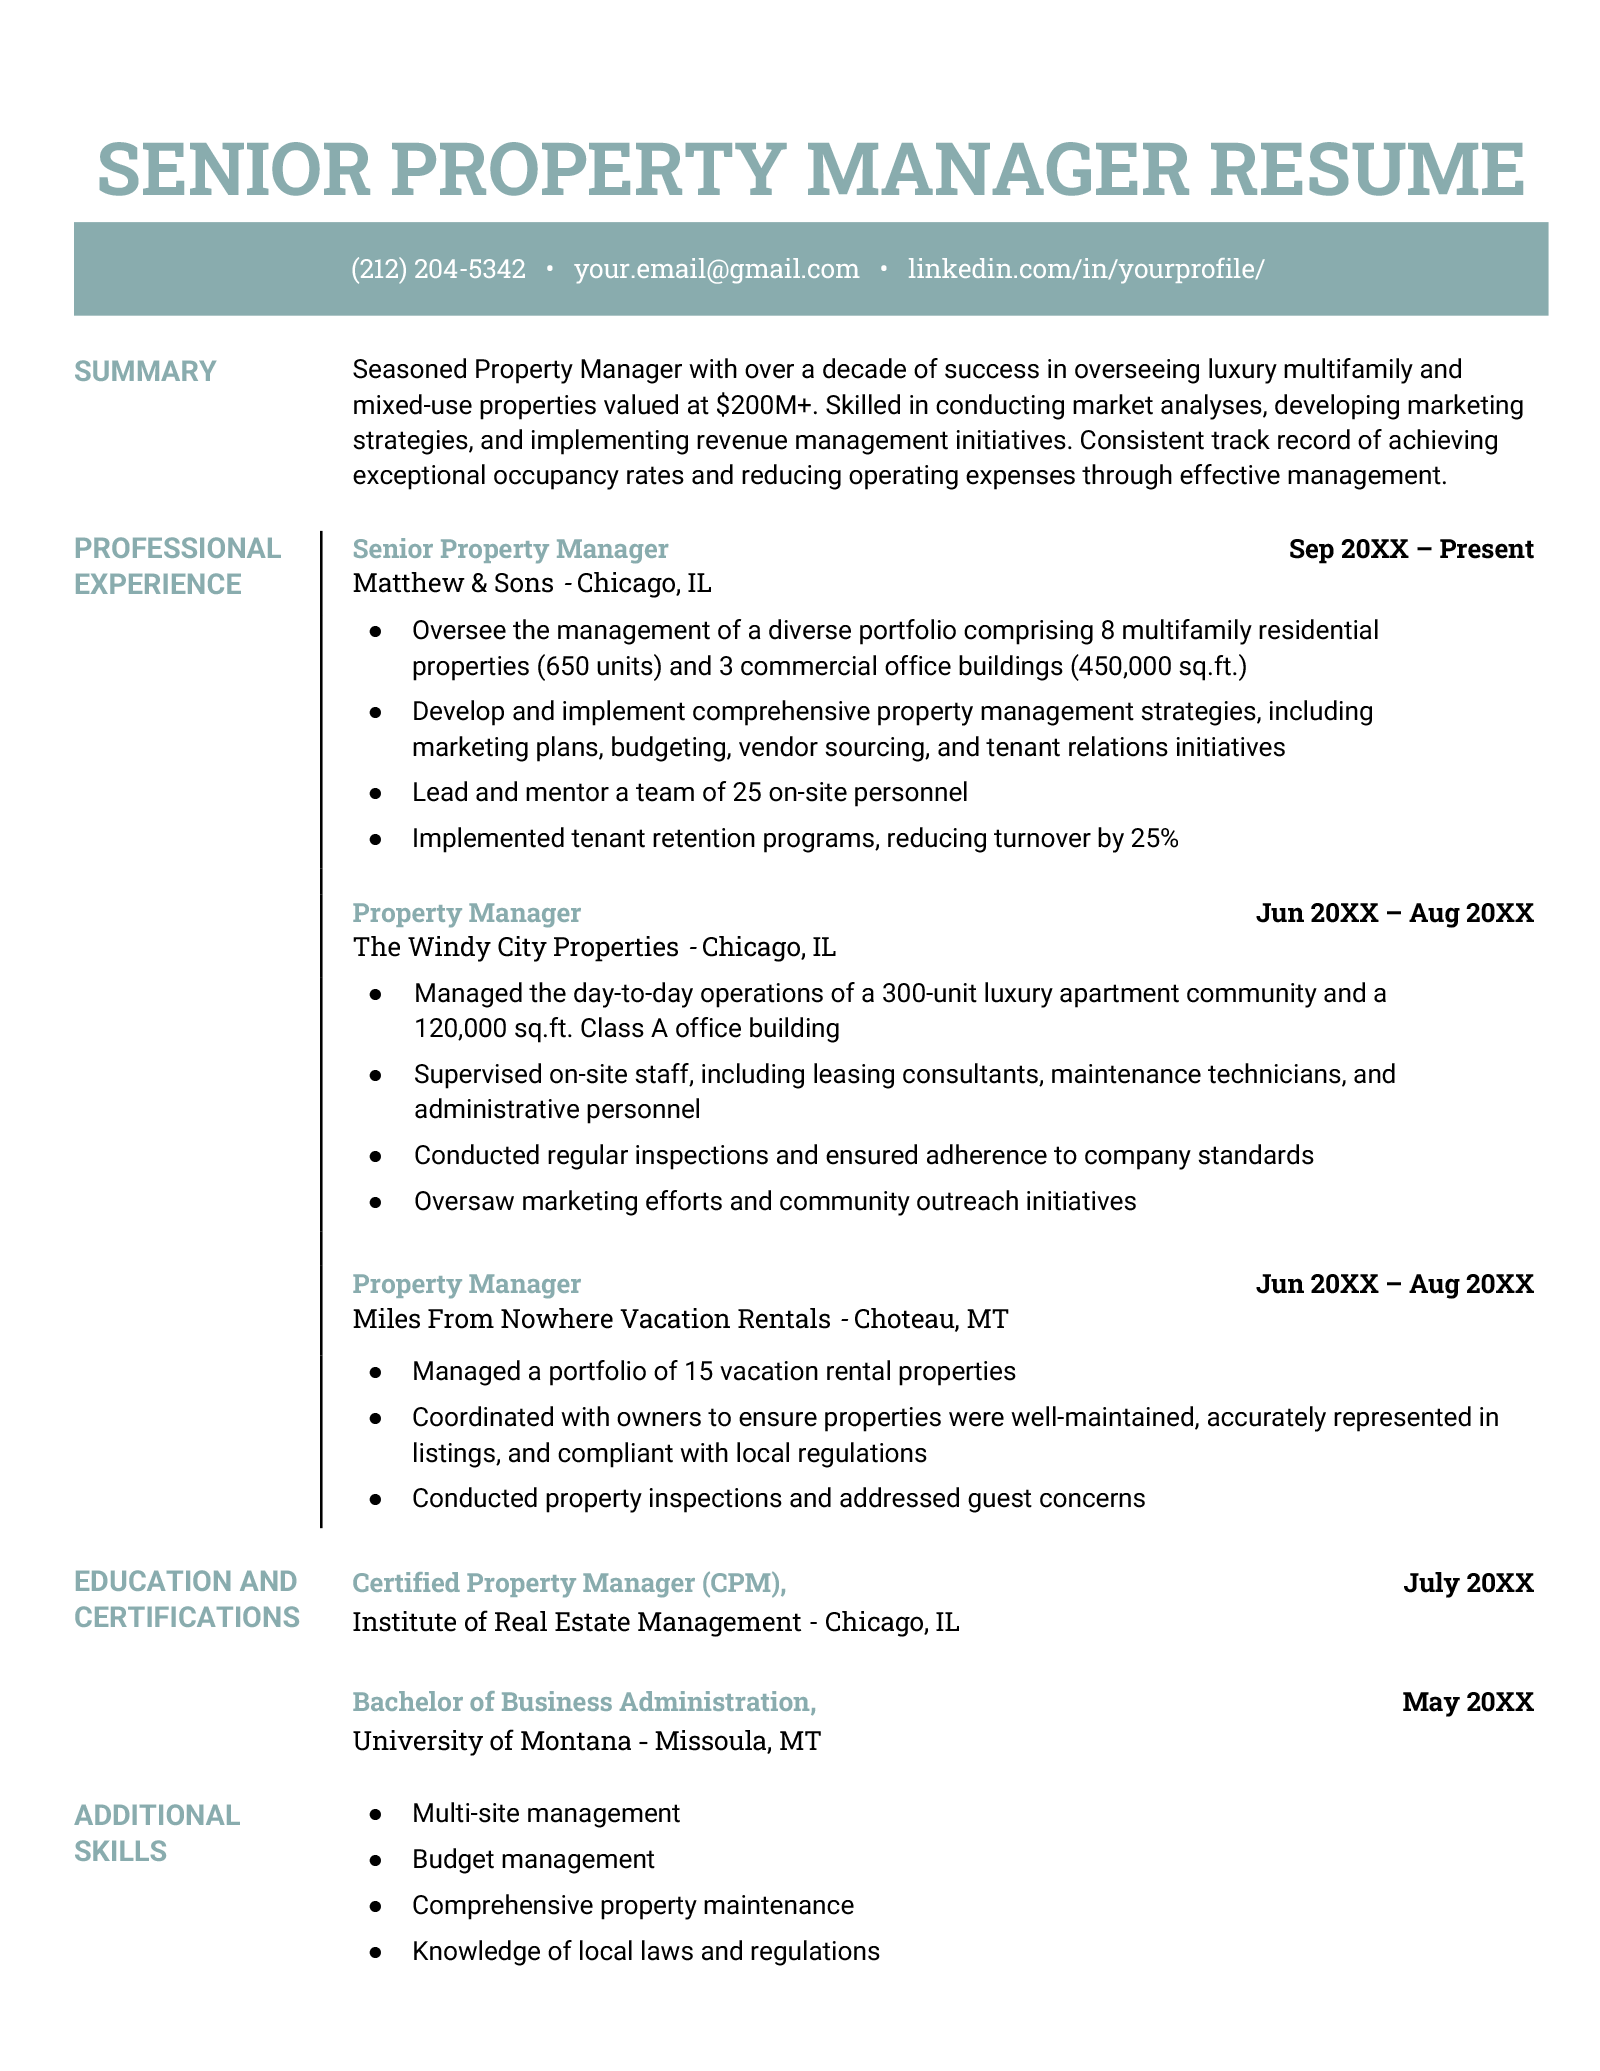 Resume template for a senior-level property manager.